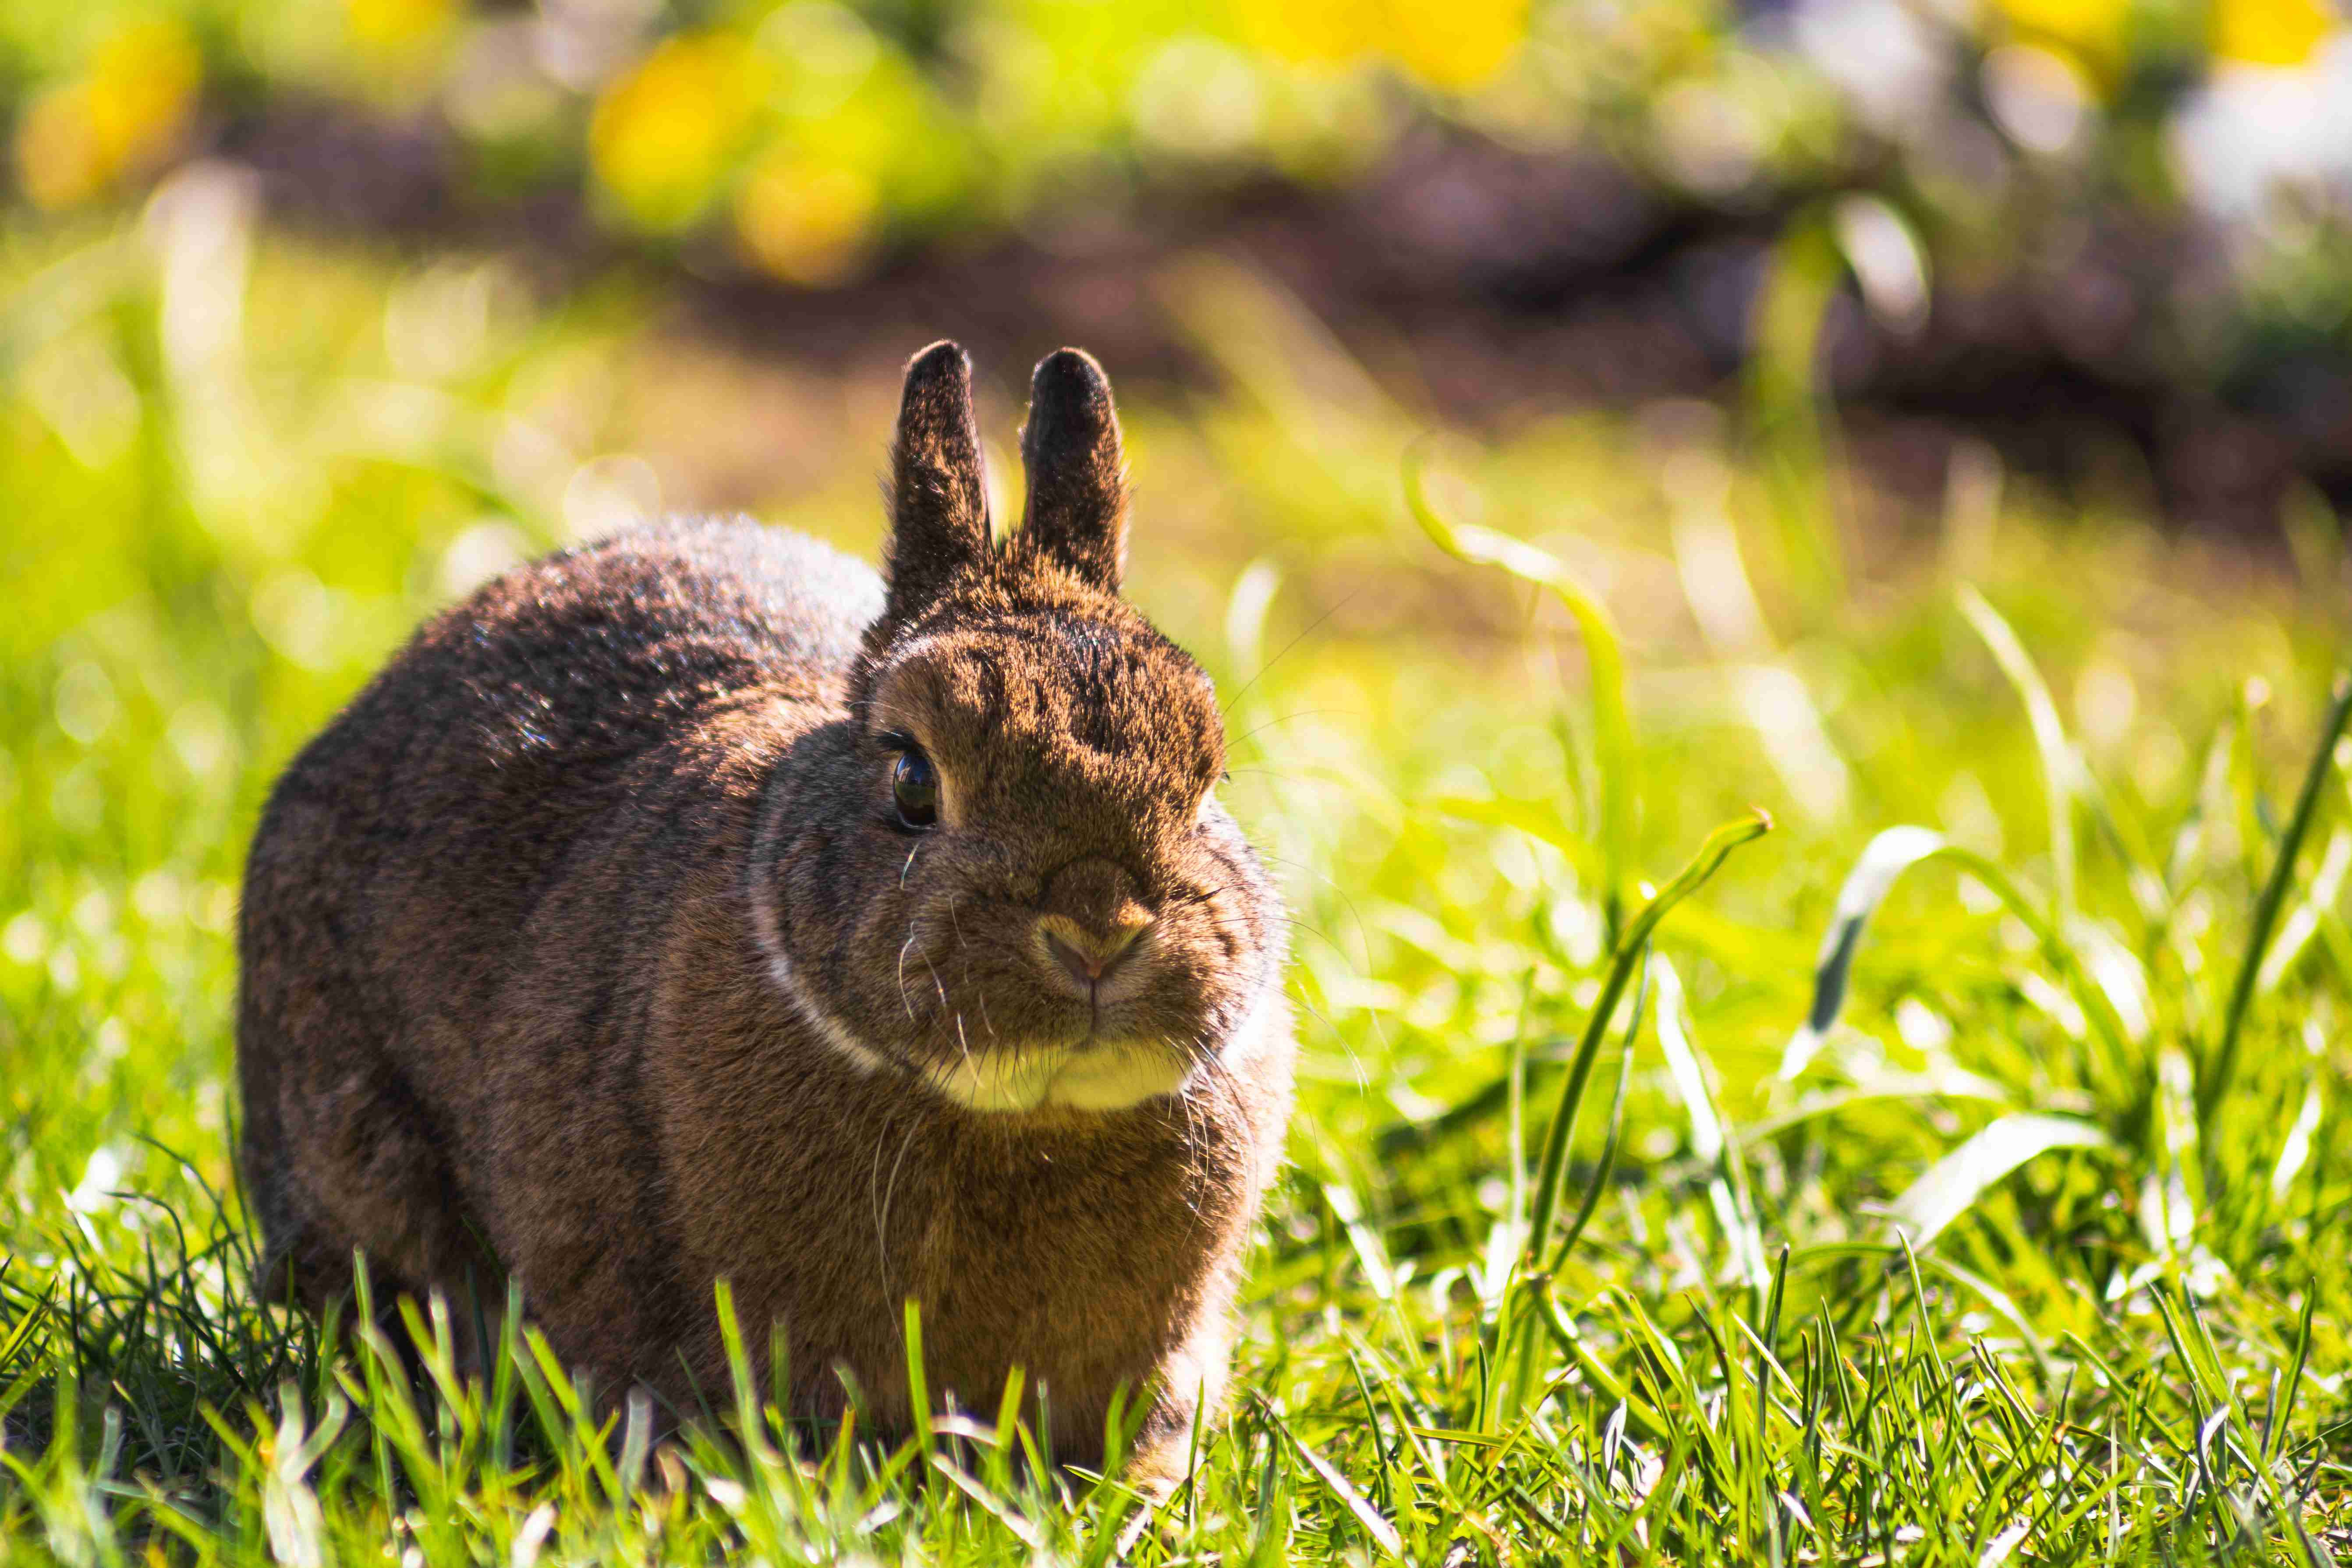 Train Your Bunny: A Guide to Harness and Leash Training for Rabbits